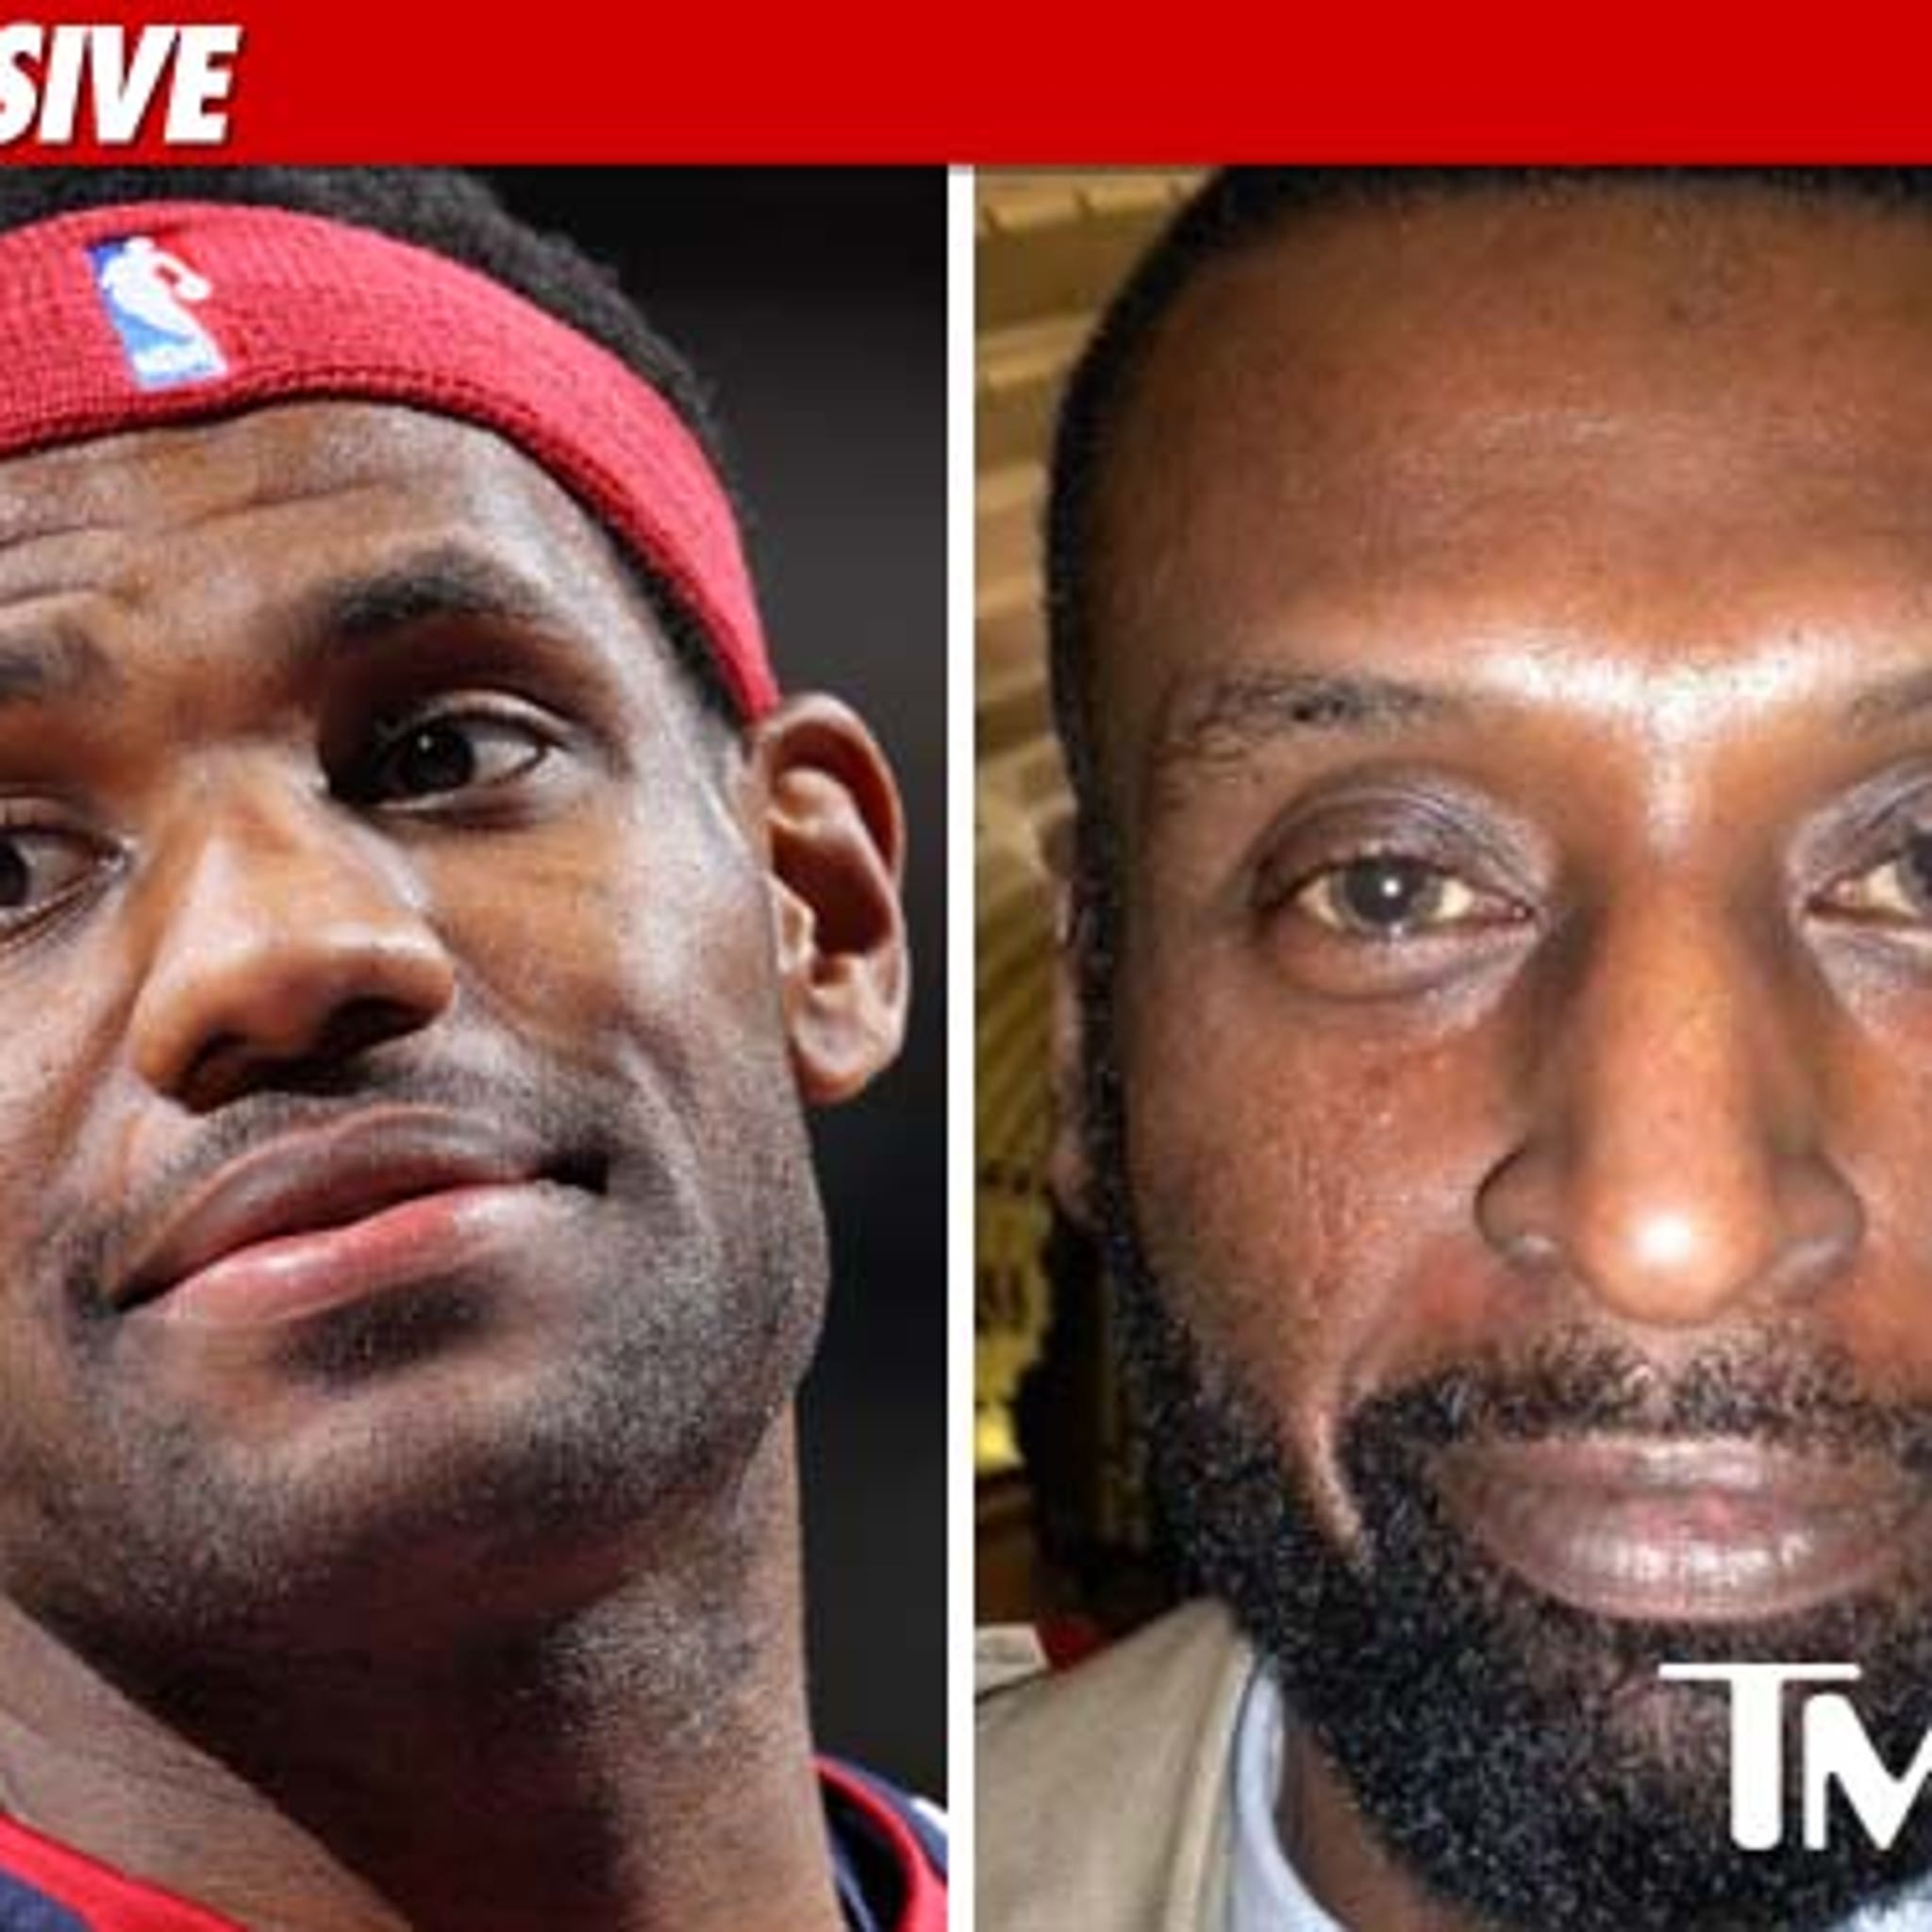 who is lebron's dad